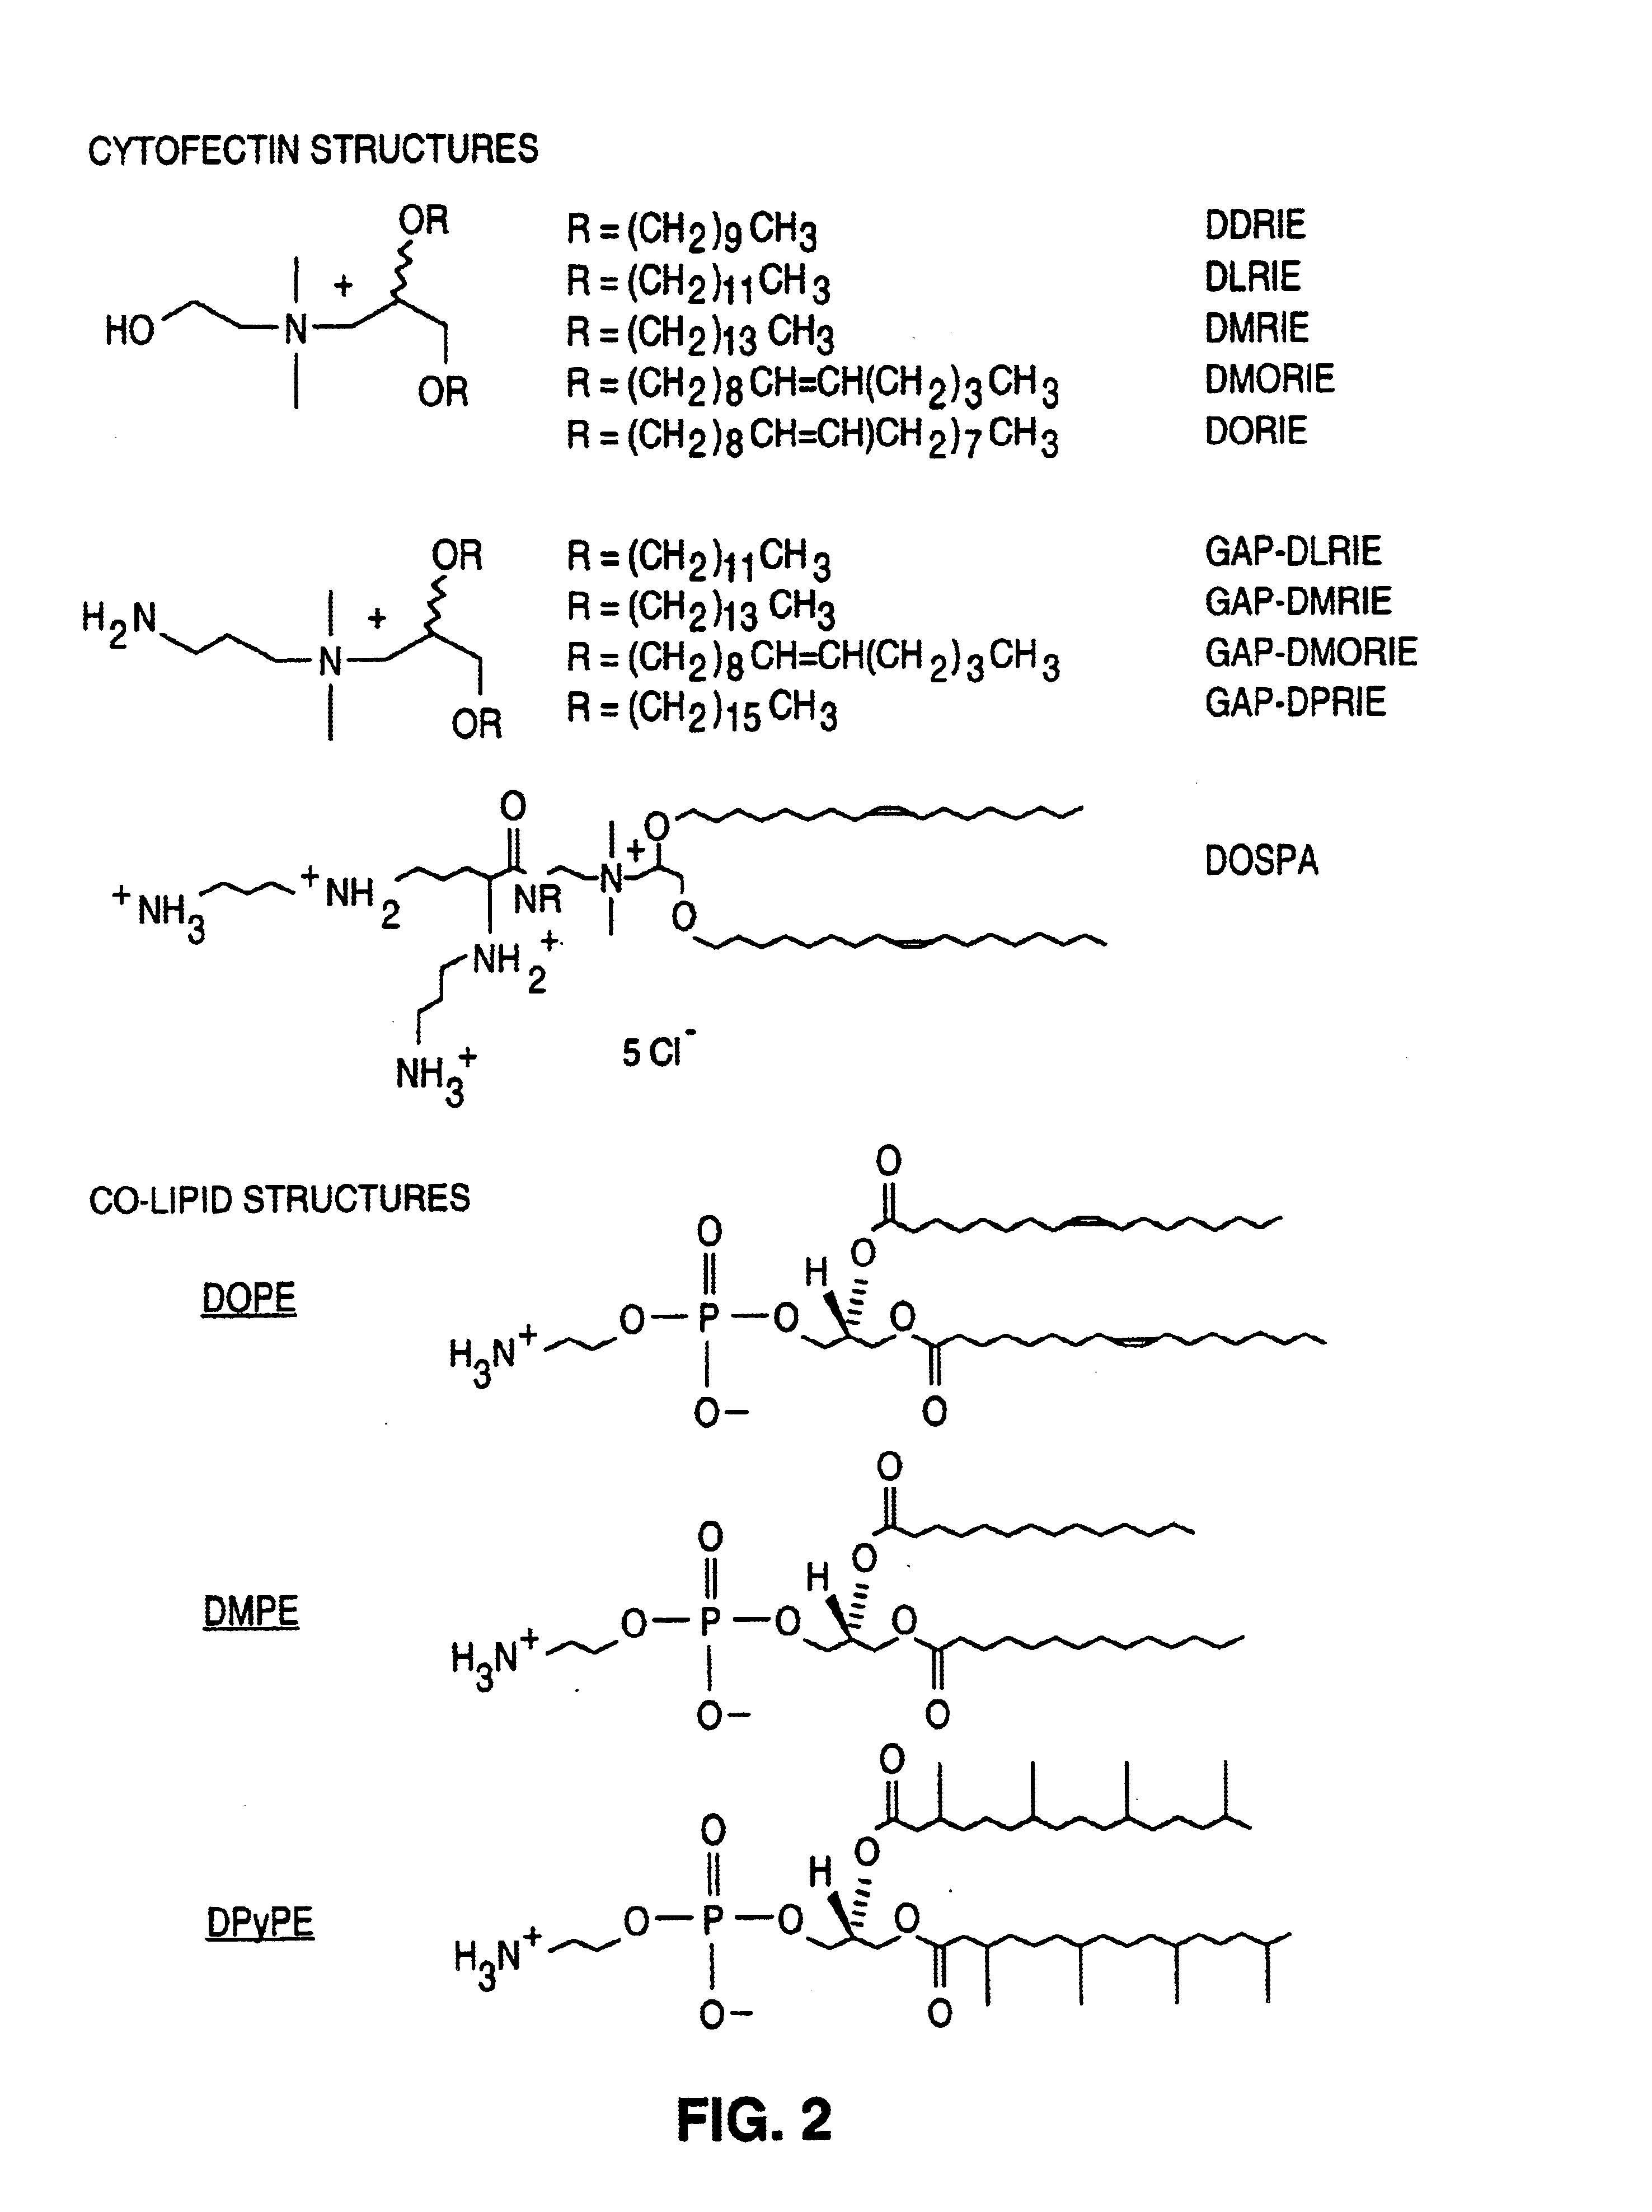 Adjuvant compositions and methods for enhancing immune responses to polynucleotide-based vaccines